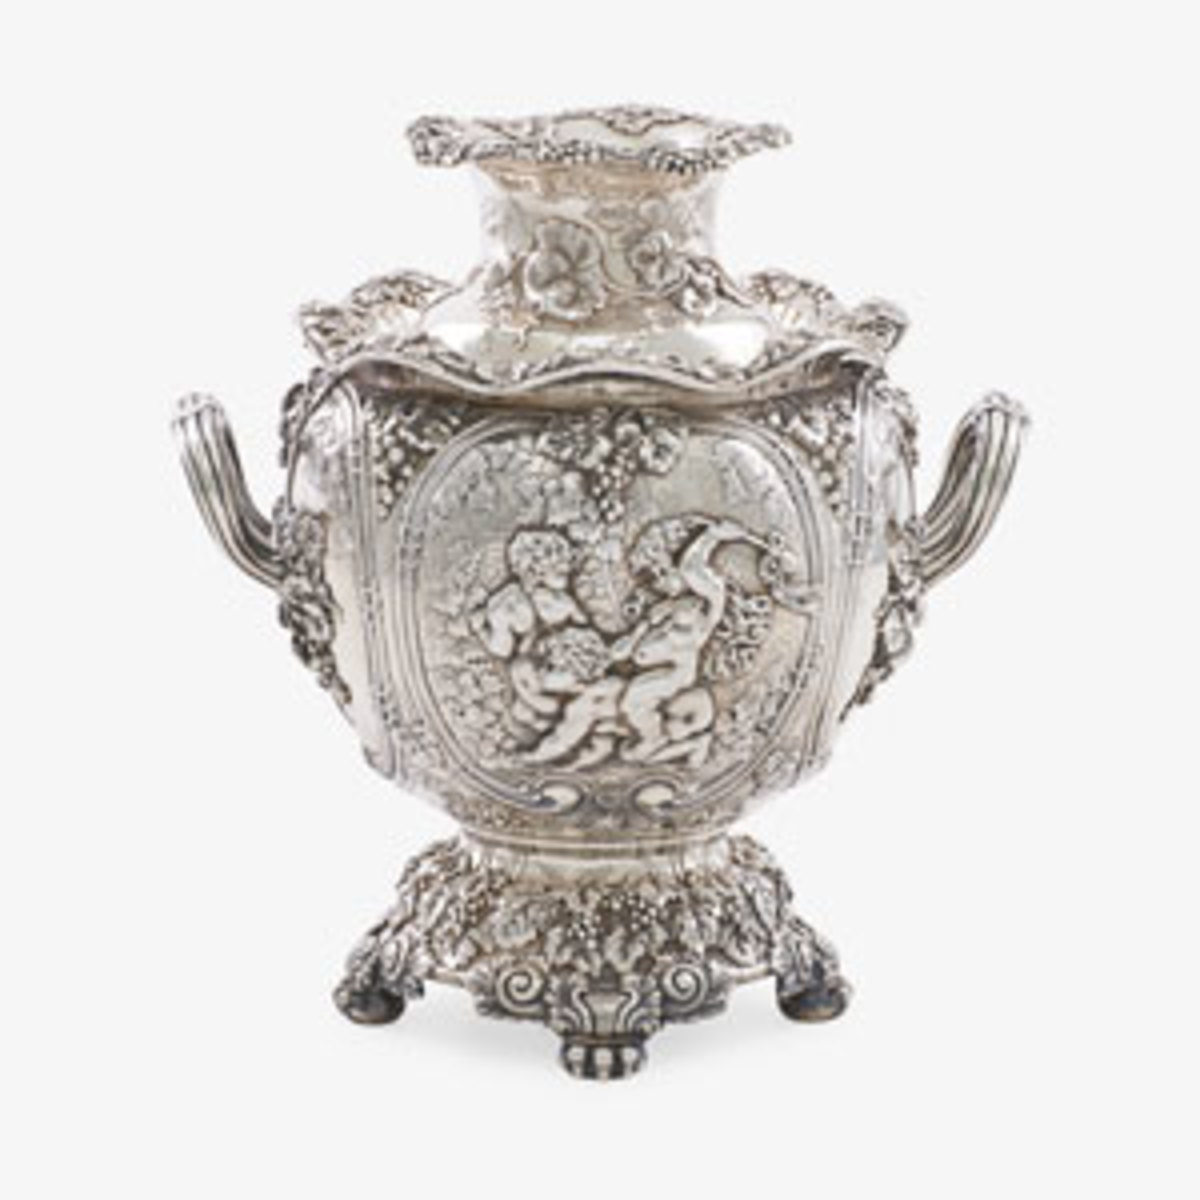  Tiffany & Co. sterling silver wine cooler; estimate: $26,000-$32,000. Images courtesy of Rago